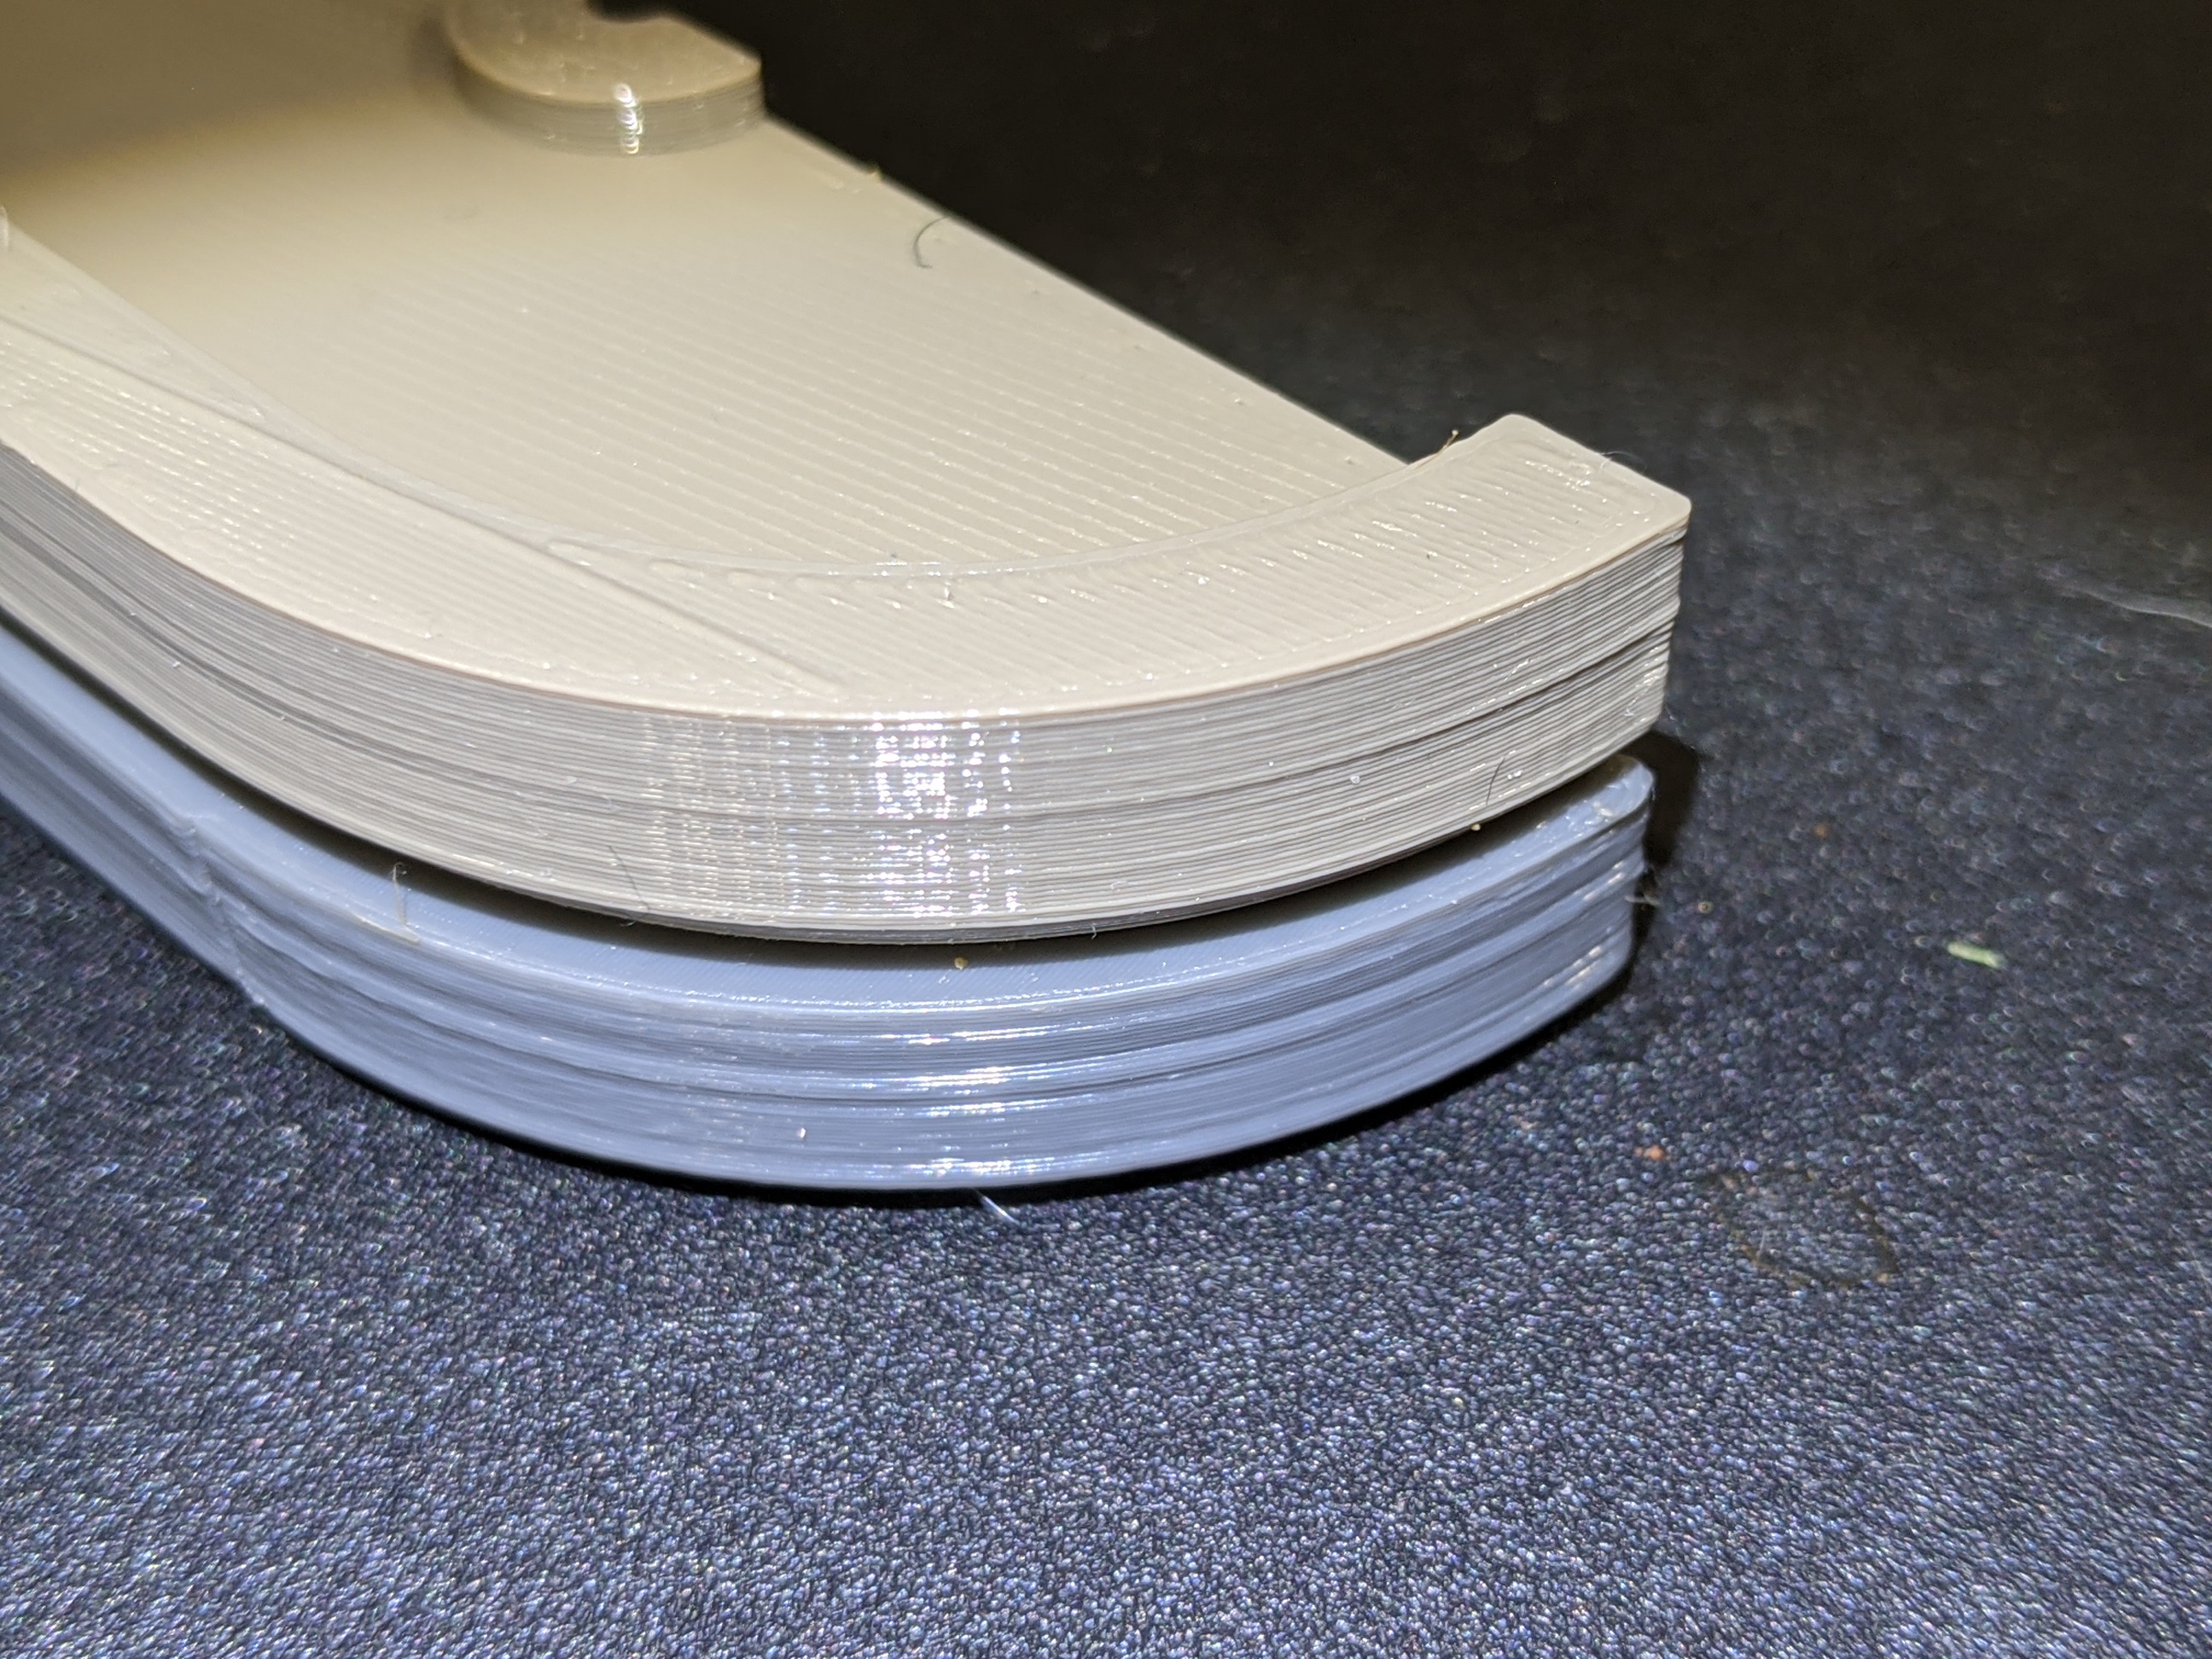 Bulge when print reaches solid layers - Page 18 – How do I print this? ( Printing help) – Prusa3D Forum